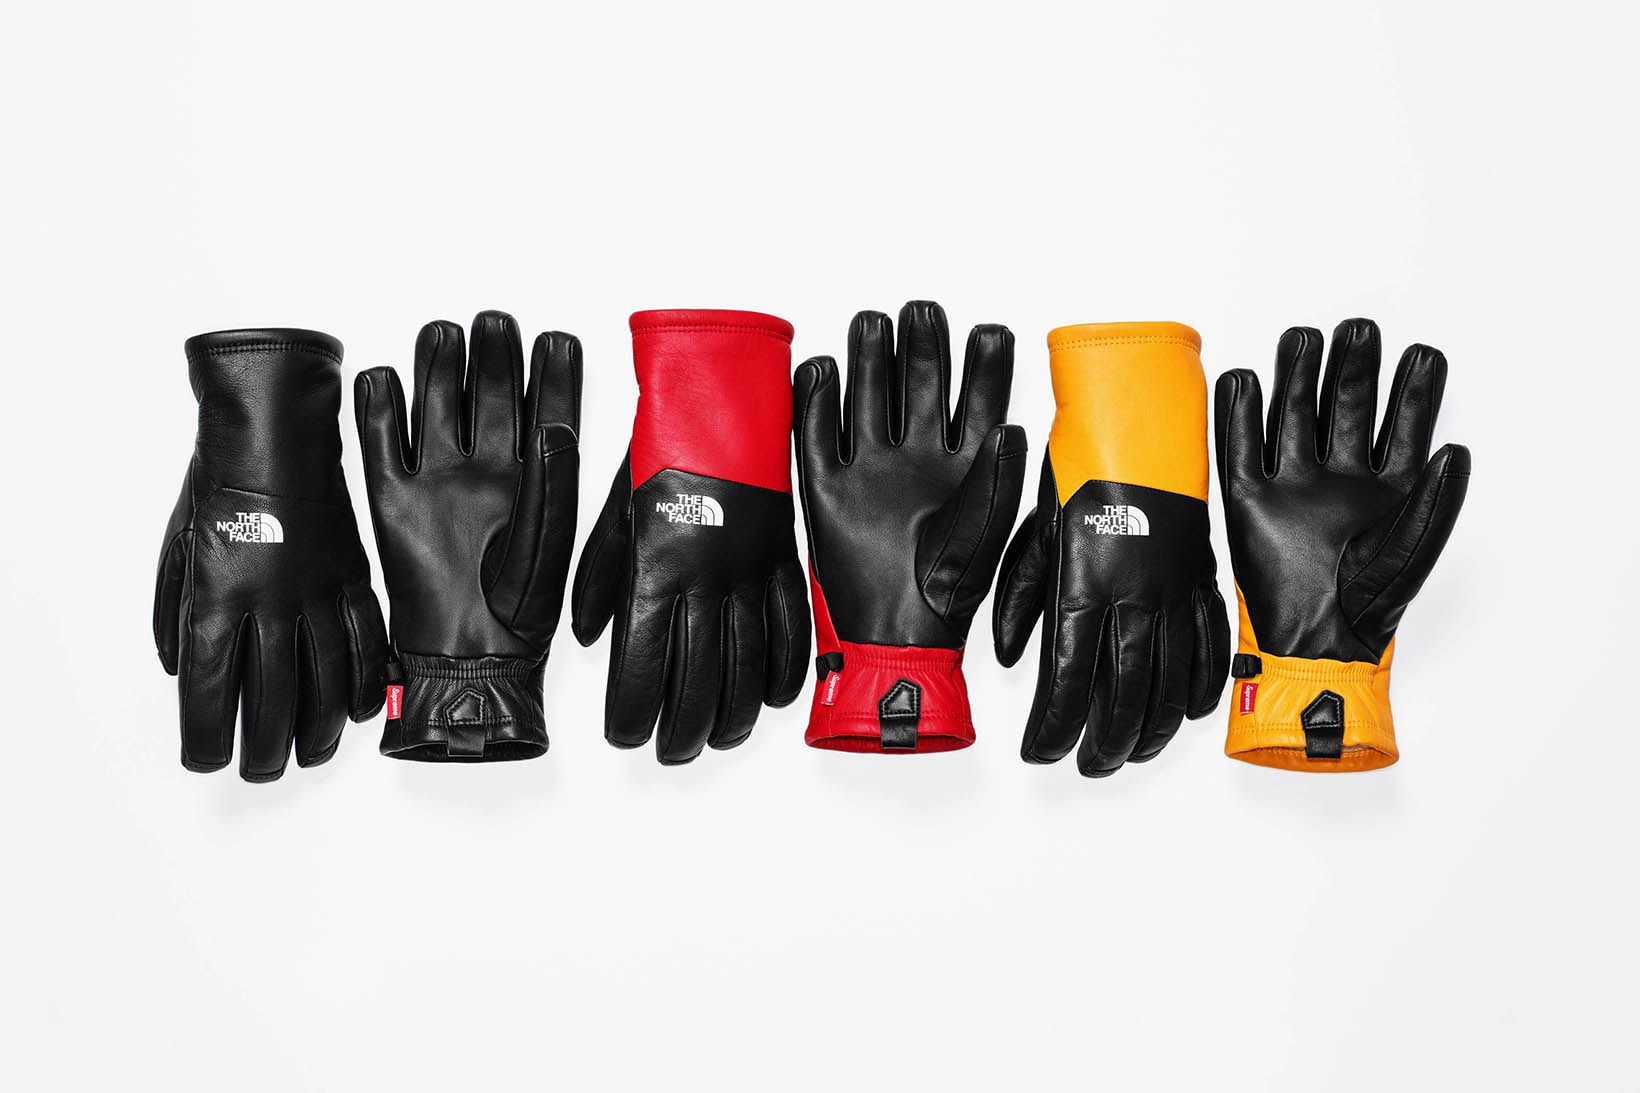 Supreme x The North Face 2017 Fall Group Gloves